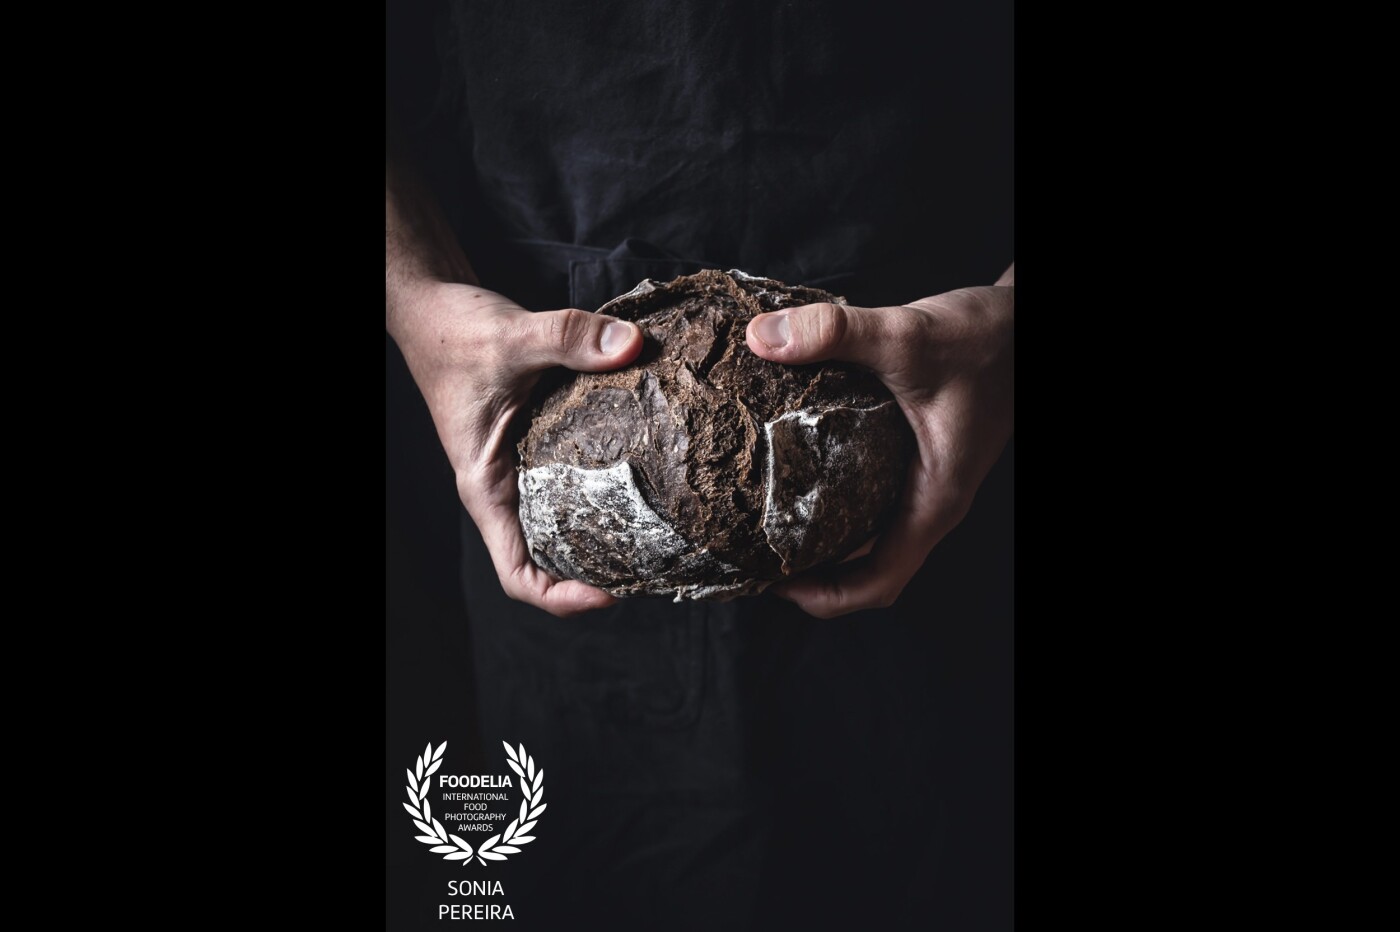 My husband holding a freshly baked carob bread.<br />
What I love the most about it, is the contrast between the bread and the hands and the texture of the bread.<br />
Shot with natural light.